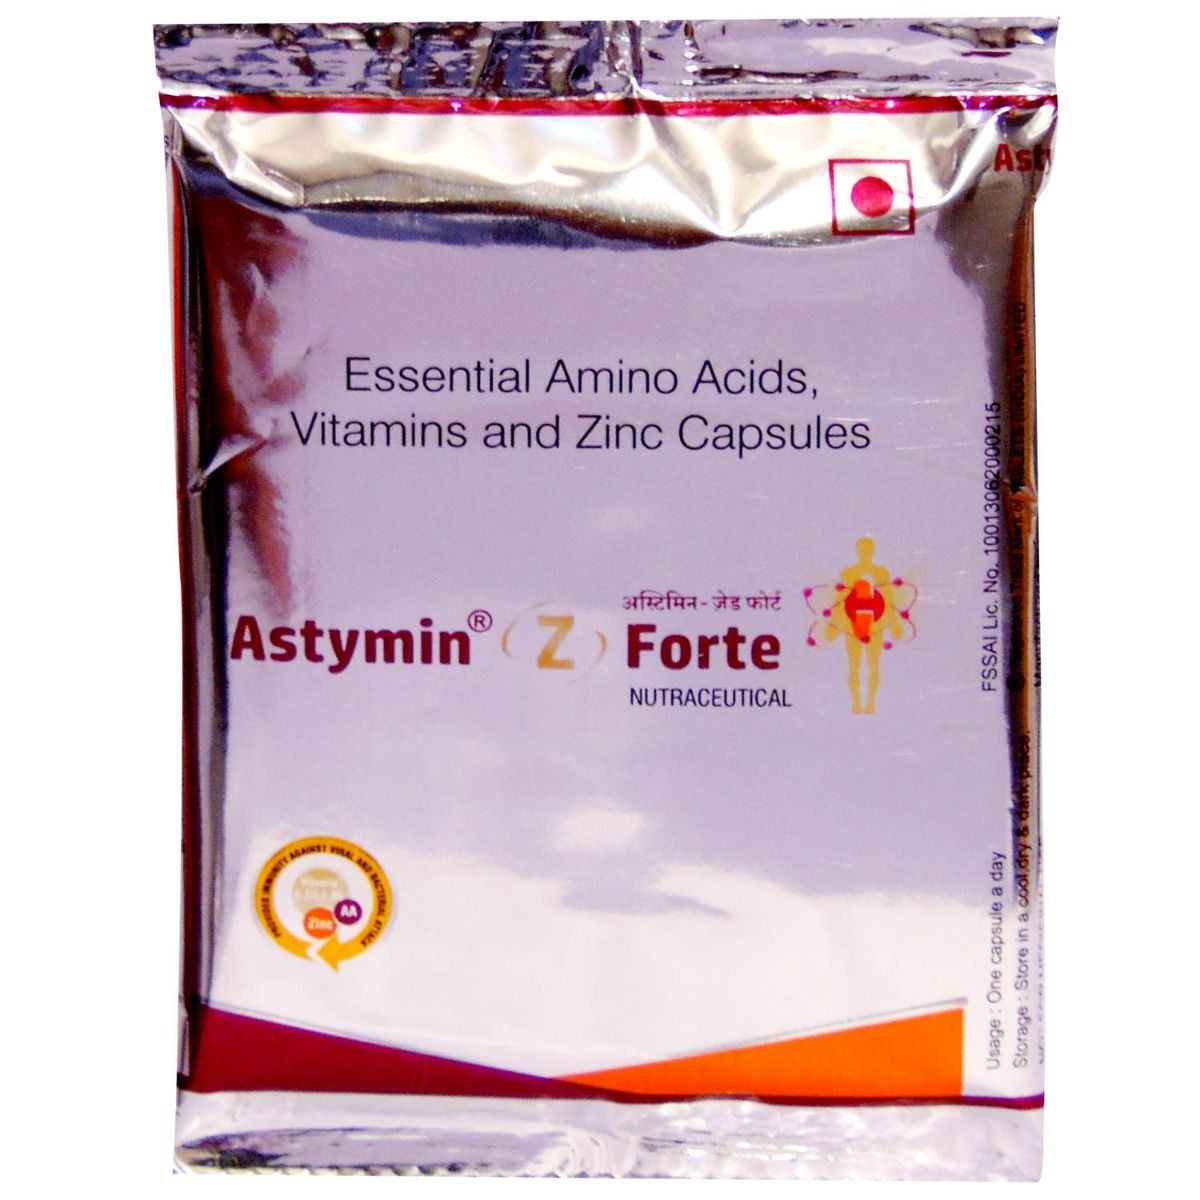 Astymin Z Forte Capsule 2 x 15's Price, Uses, Side Effects, Composition ...